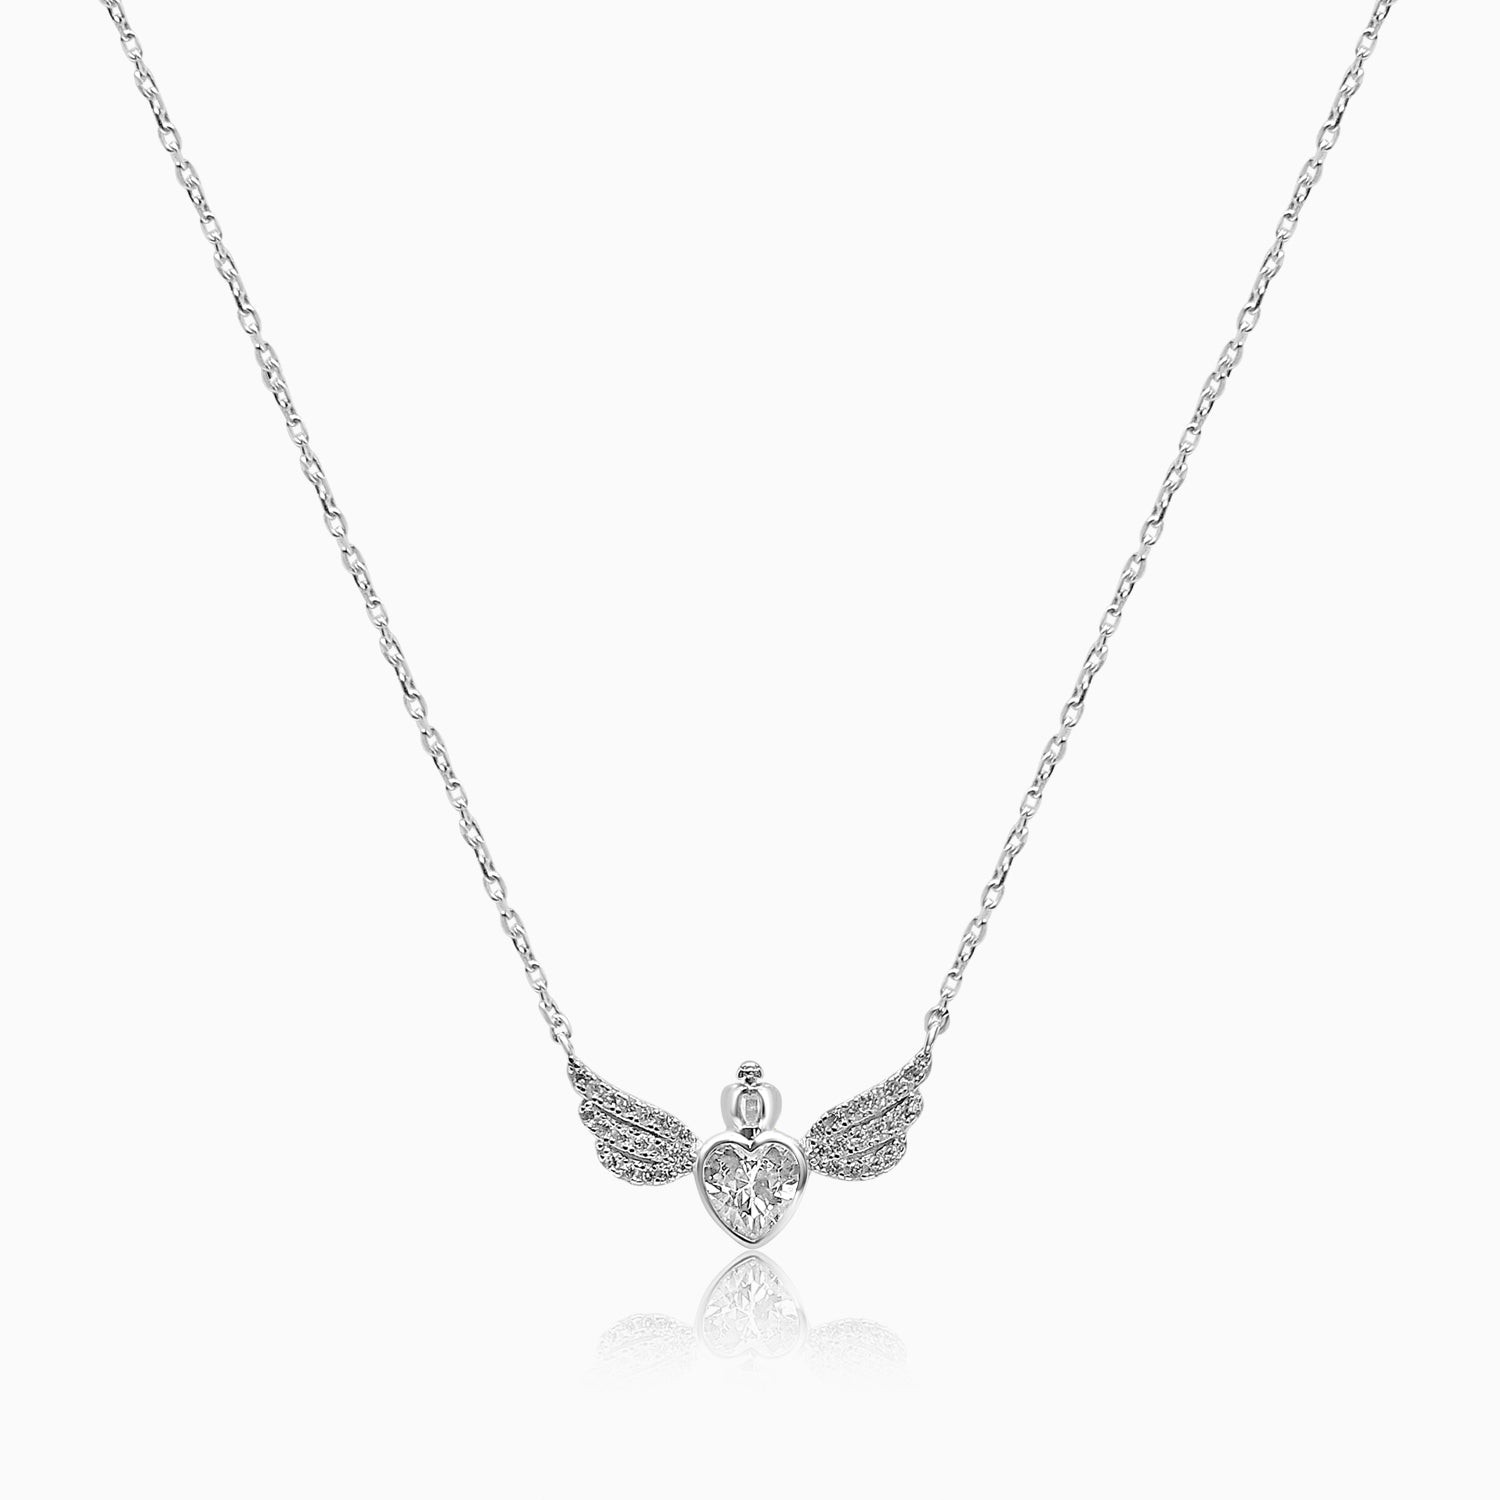 Silver Fly High Queen of Hearts Necklace